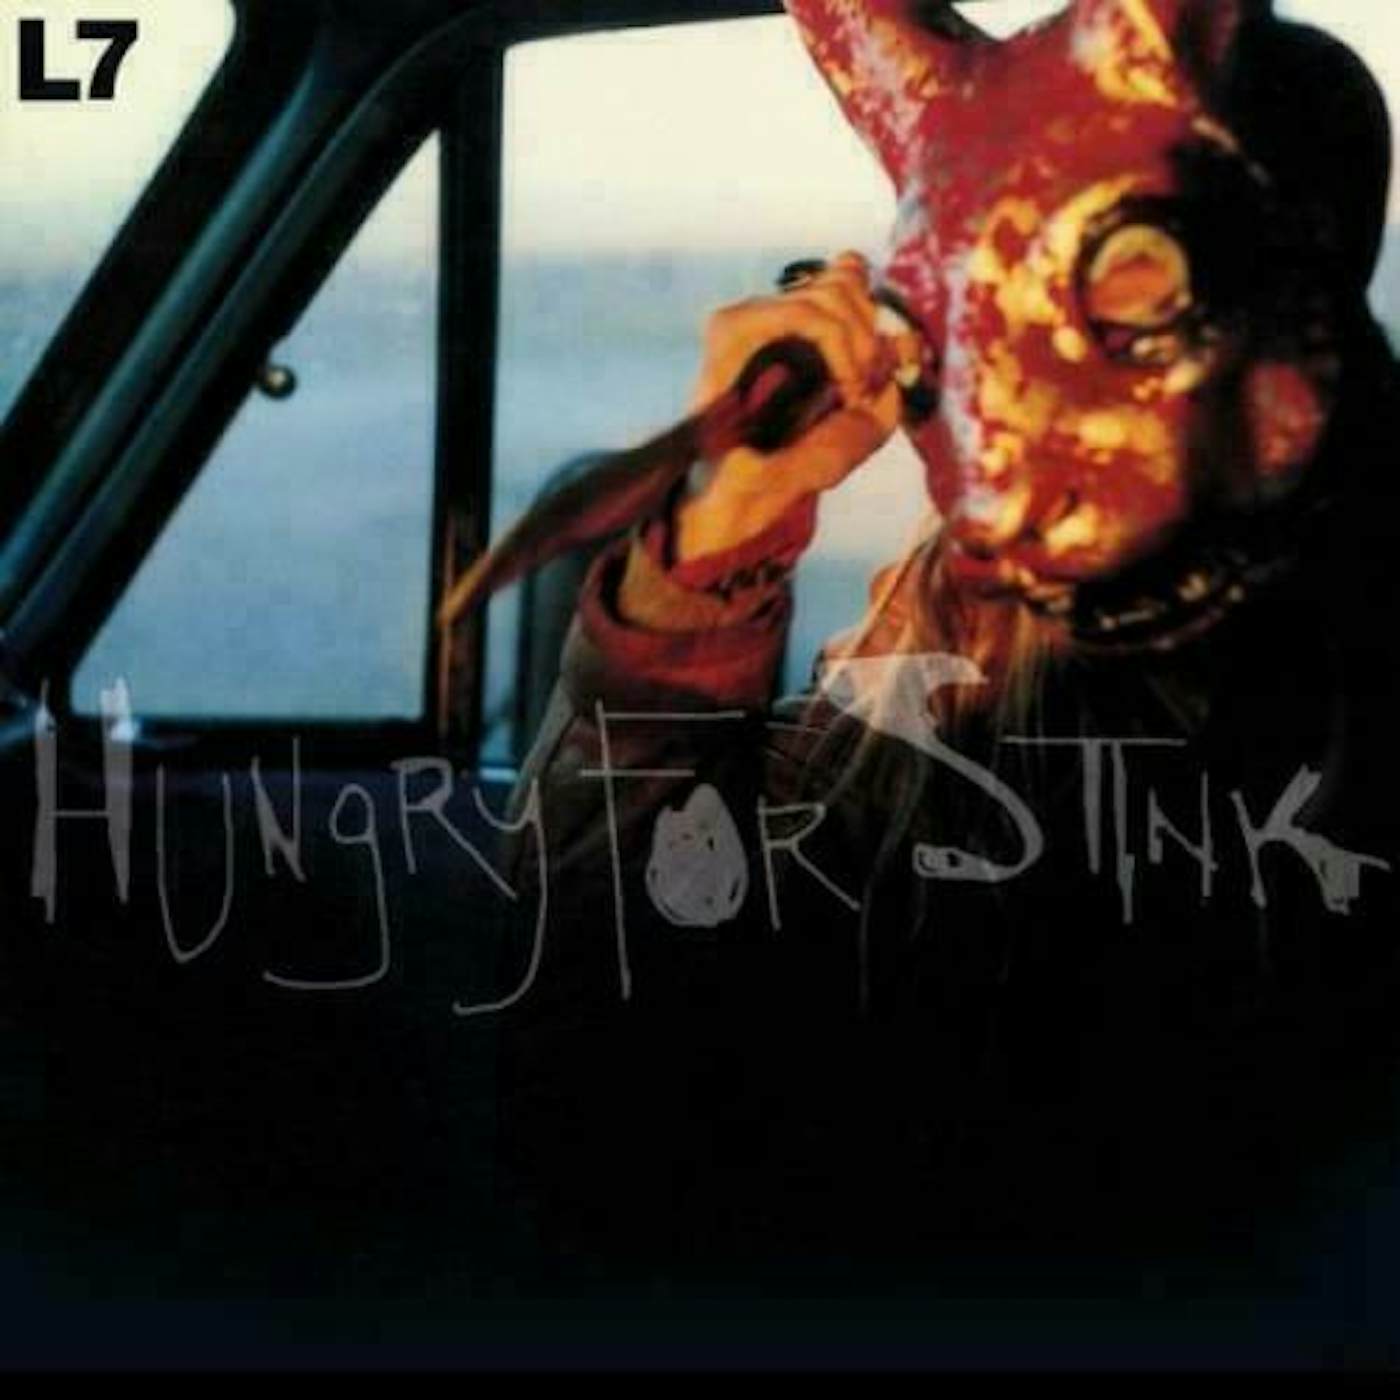 L7 Hungry For Stink Vinyl Record